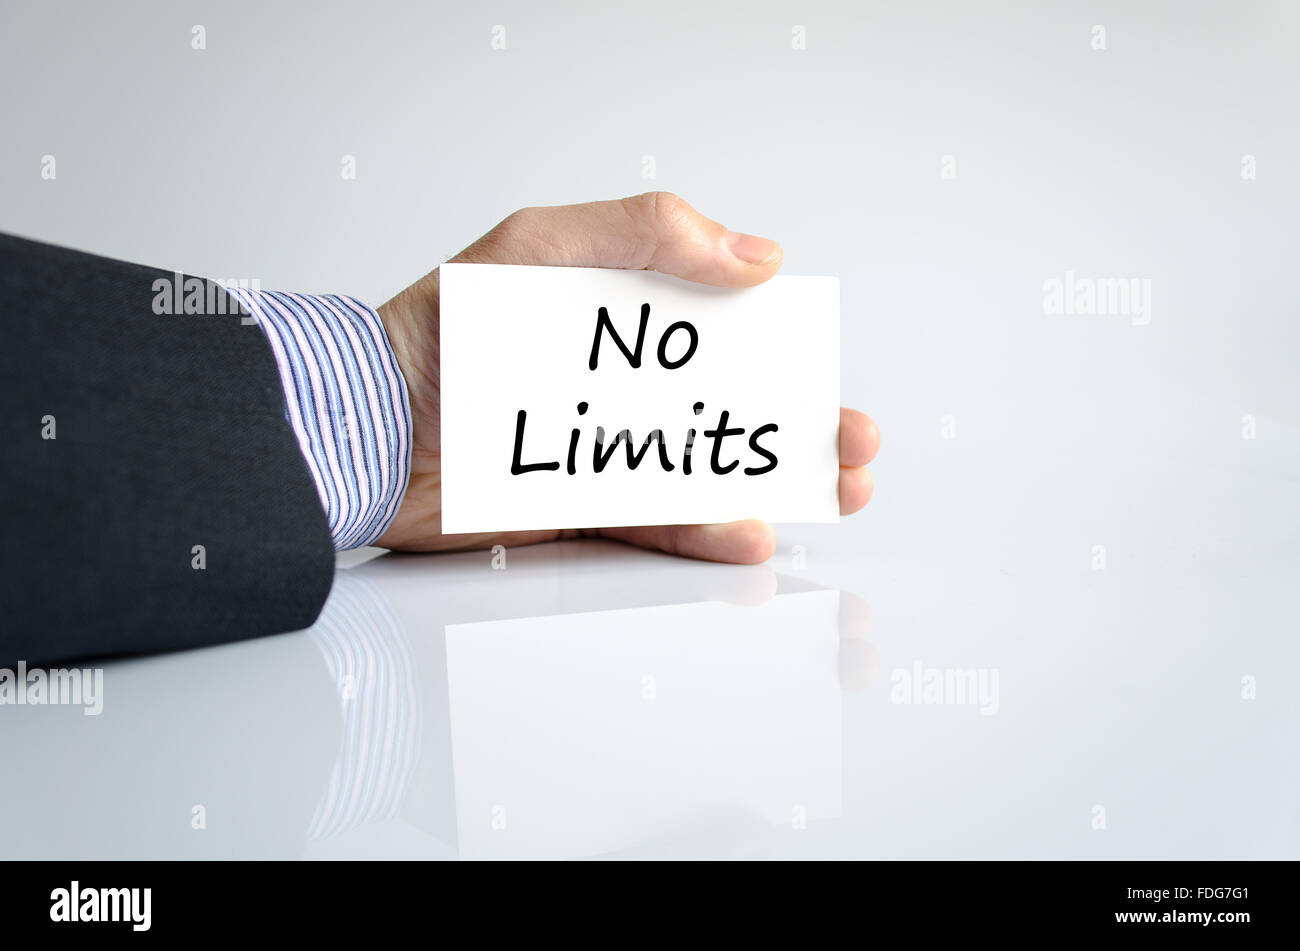 No limits text concept isolated over white background Stock Photo